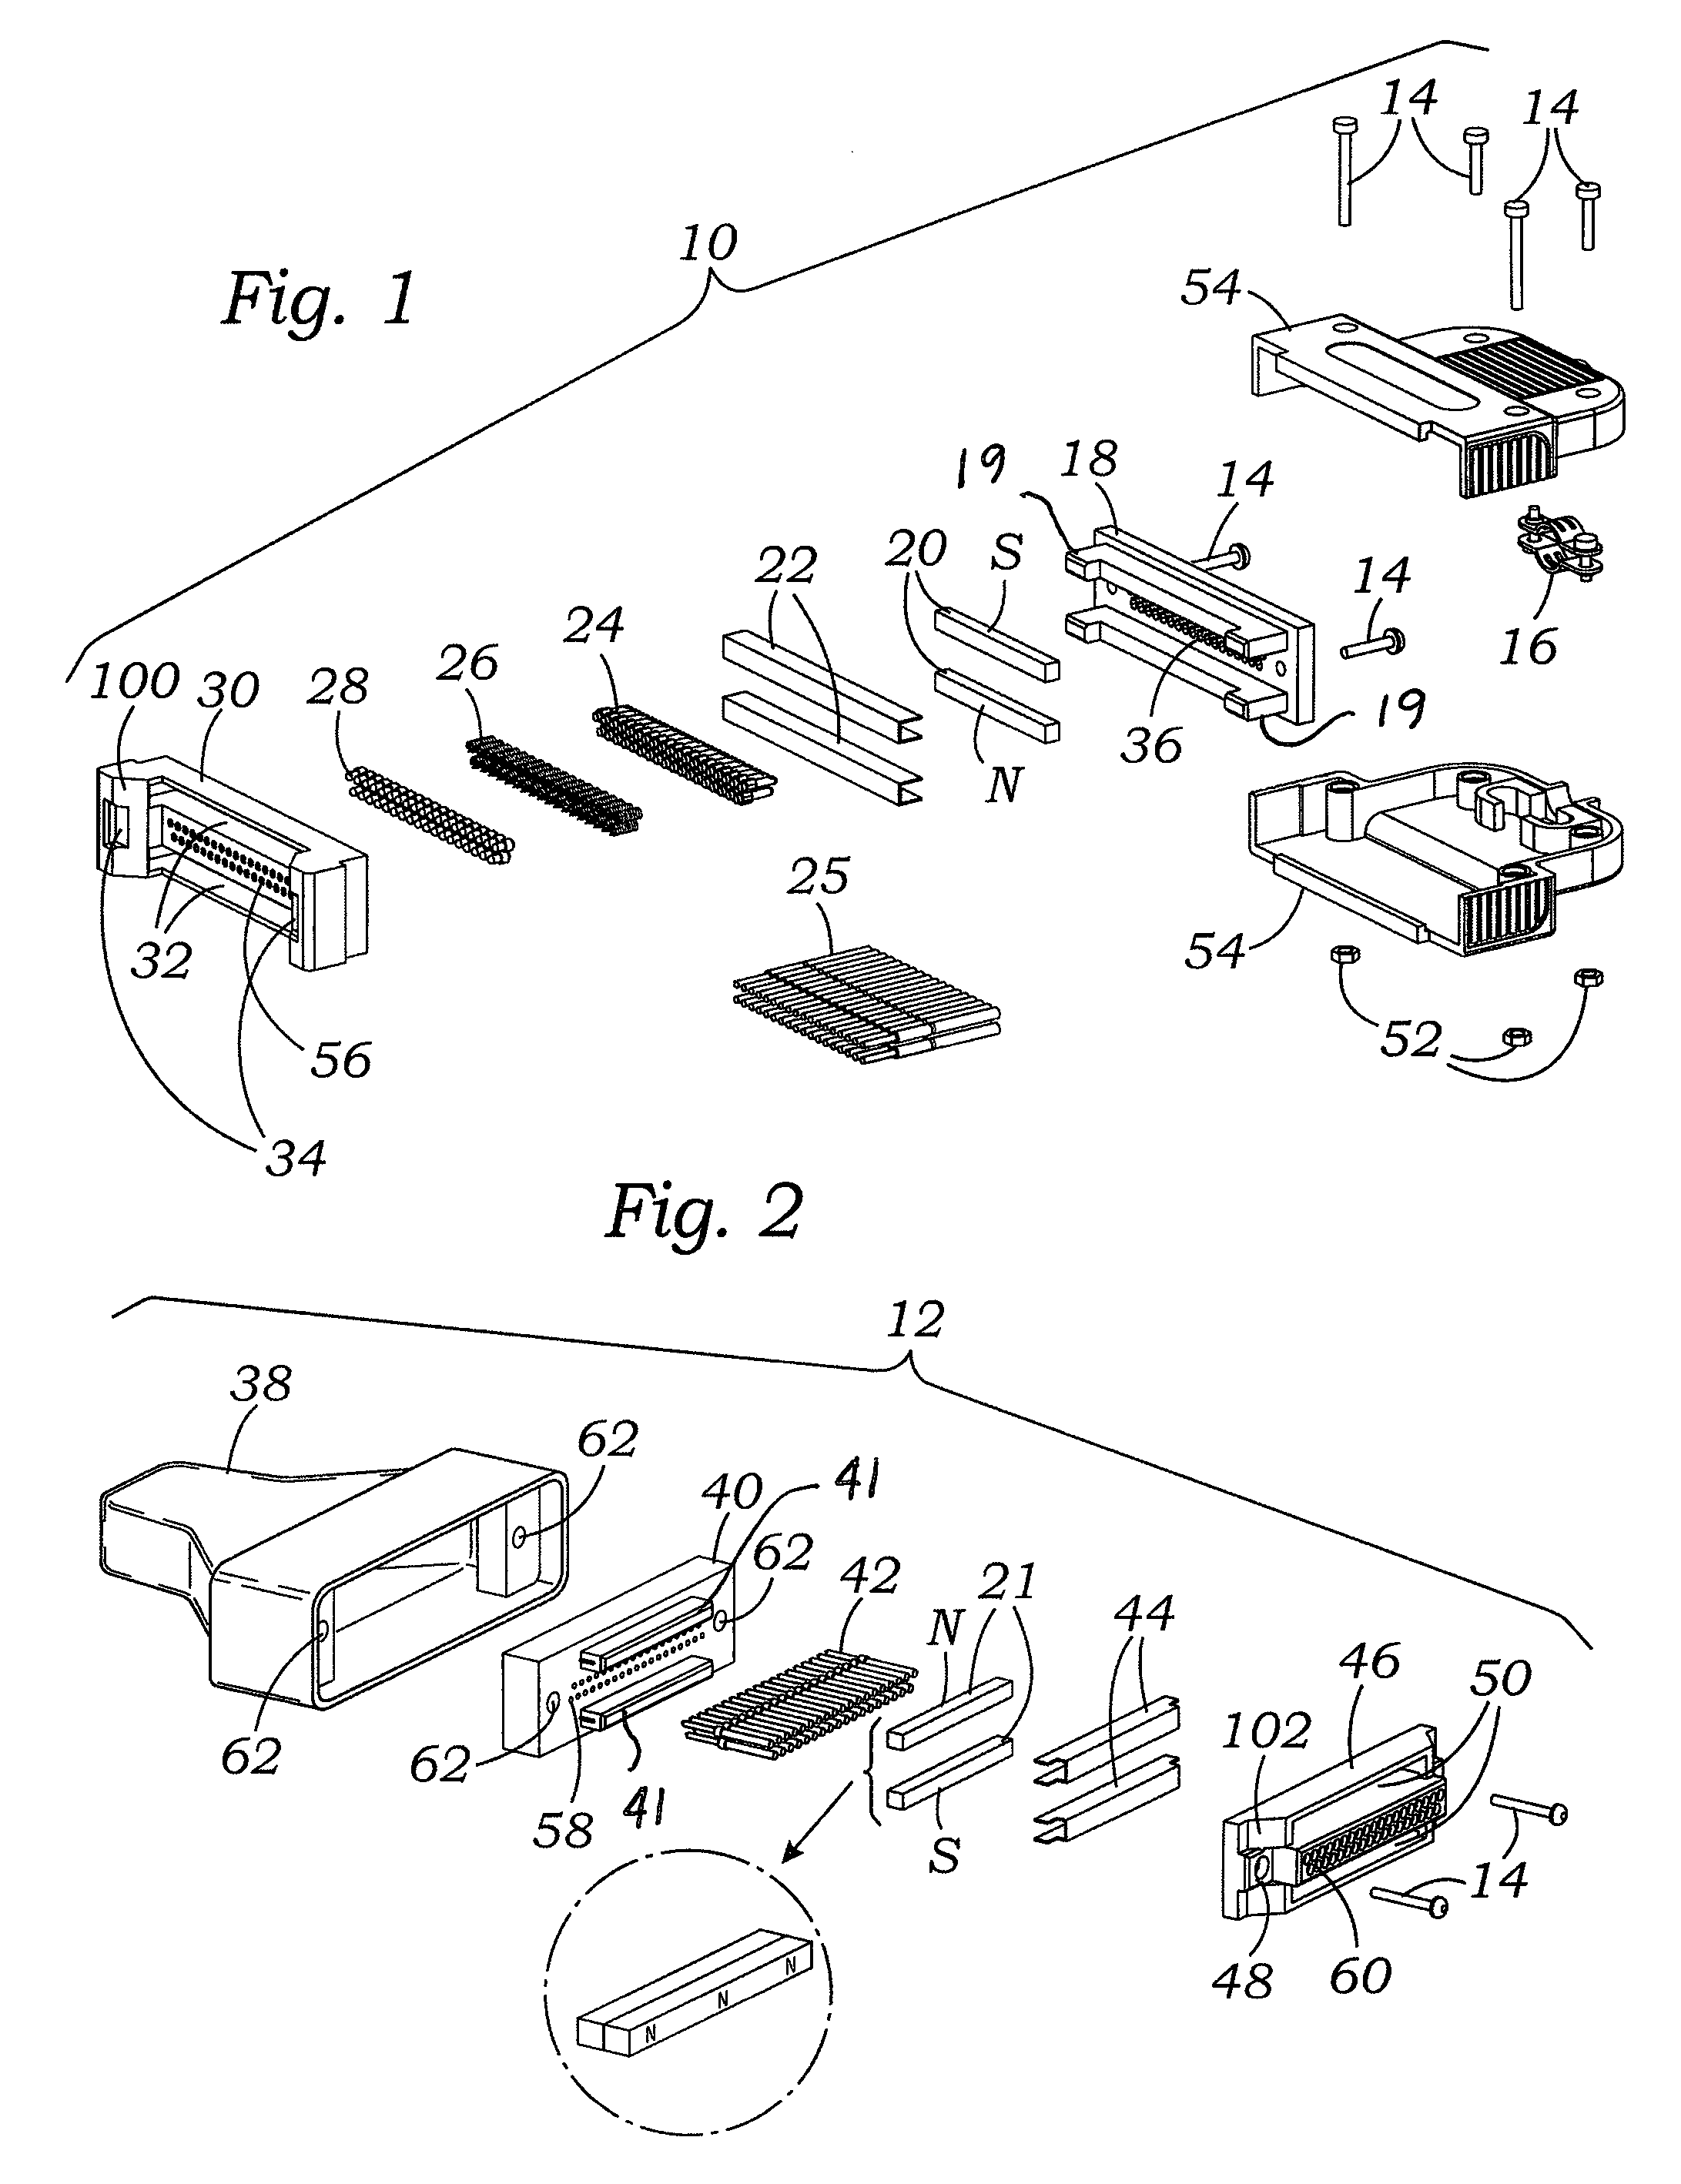 Magnetic-enabled connector device